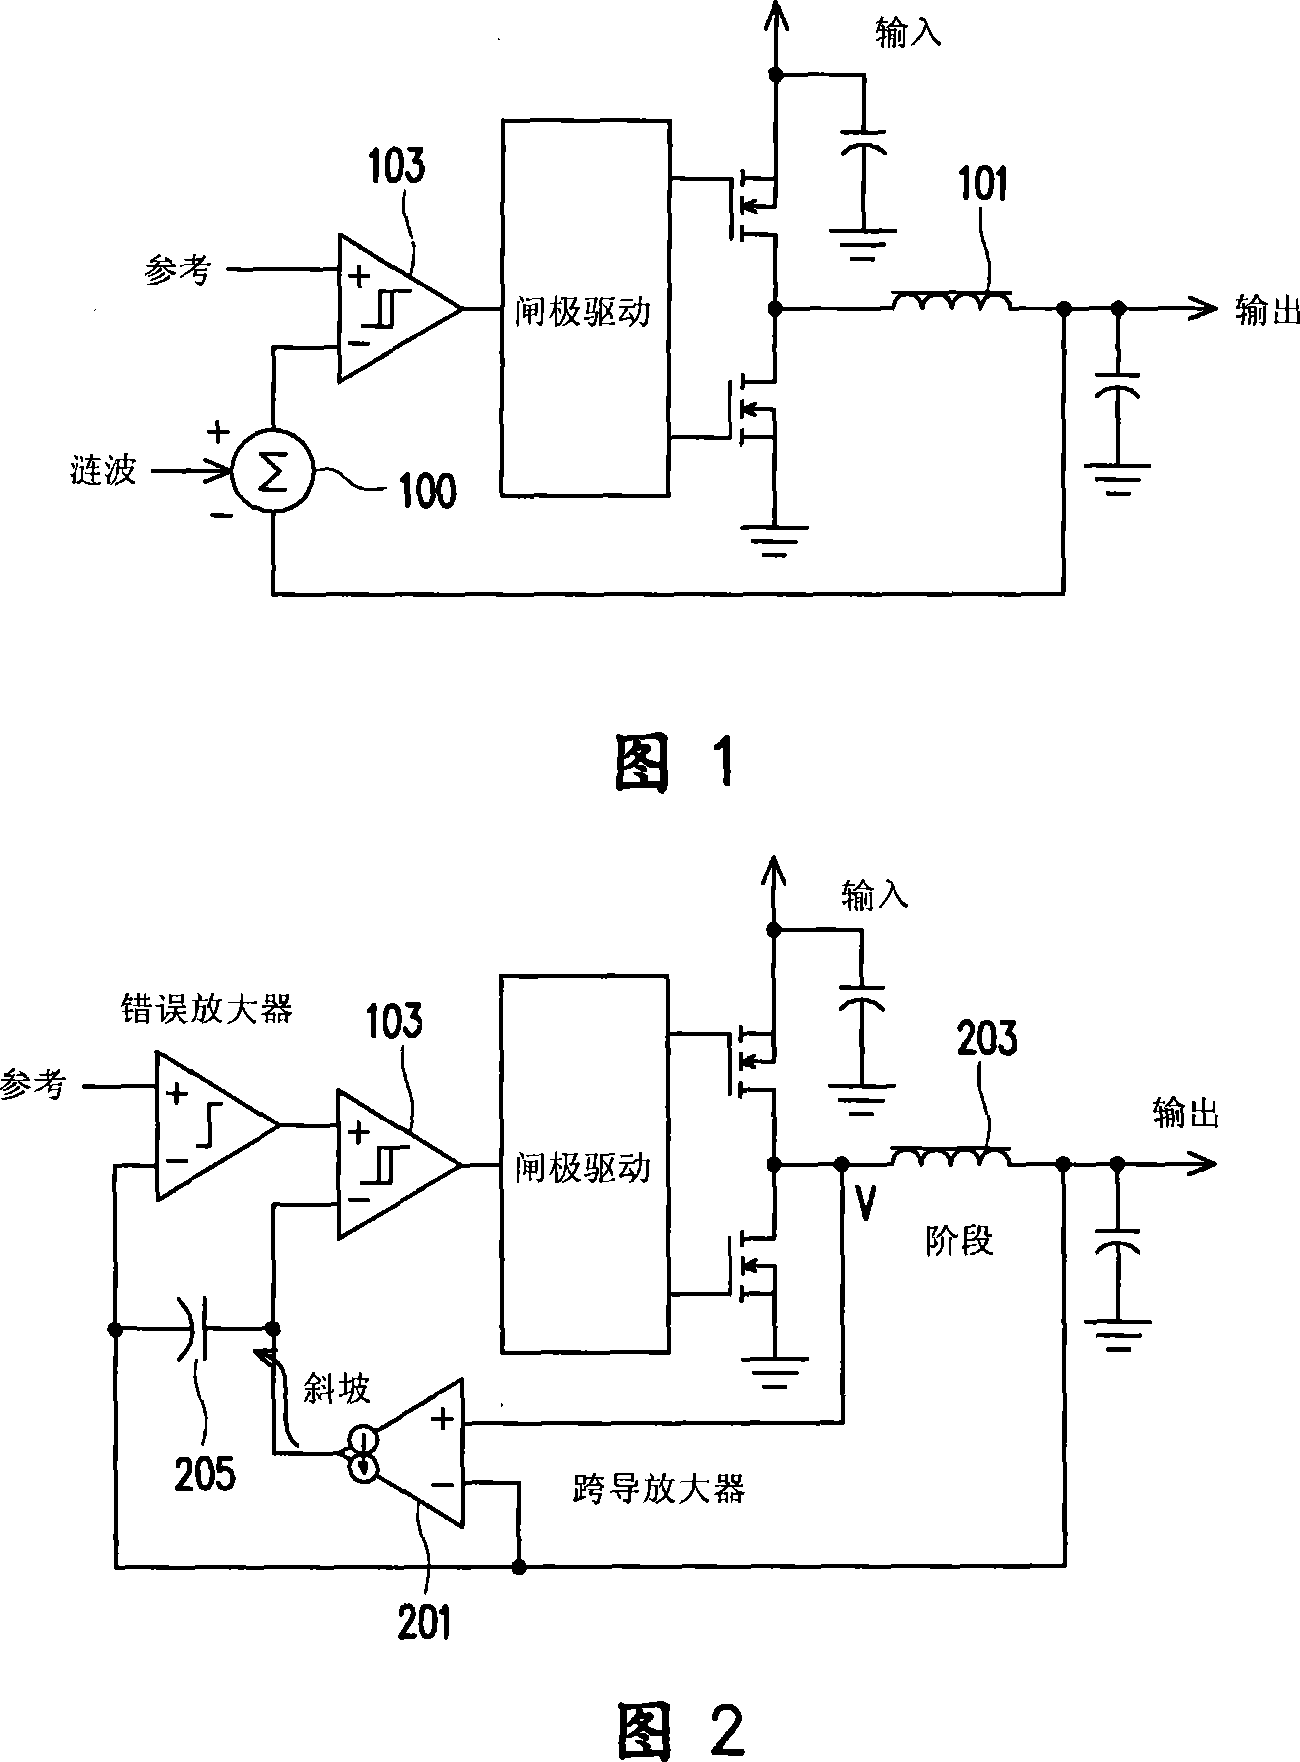 DC-DC decompression converter and ripple improving circuit